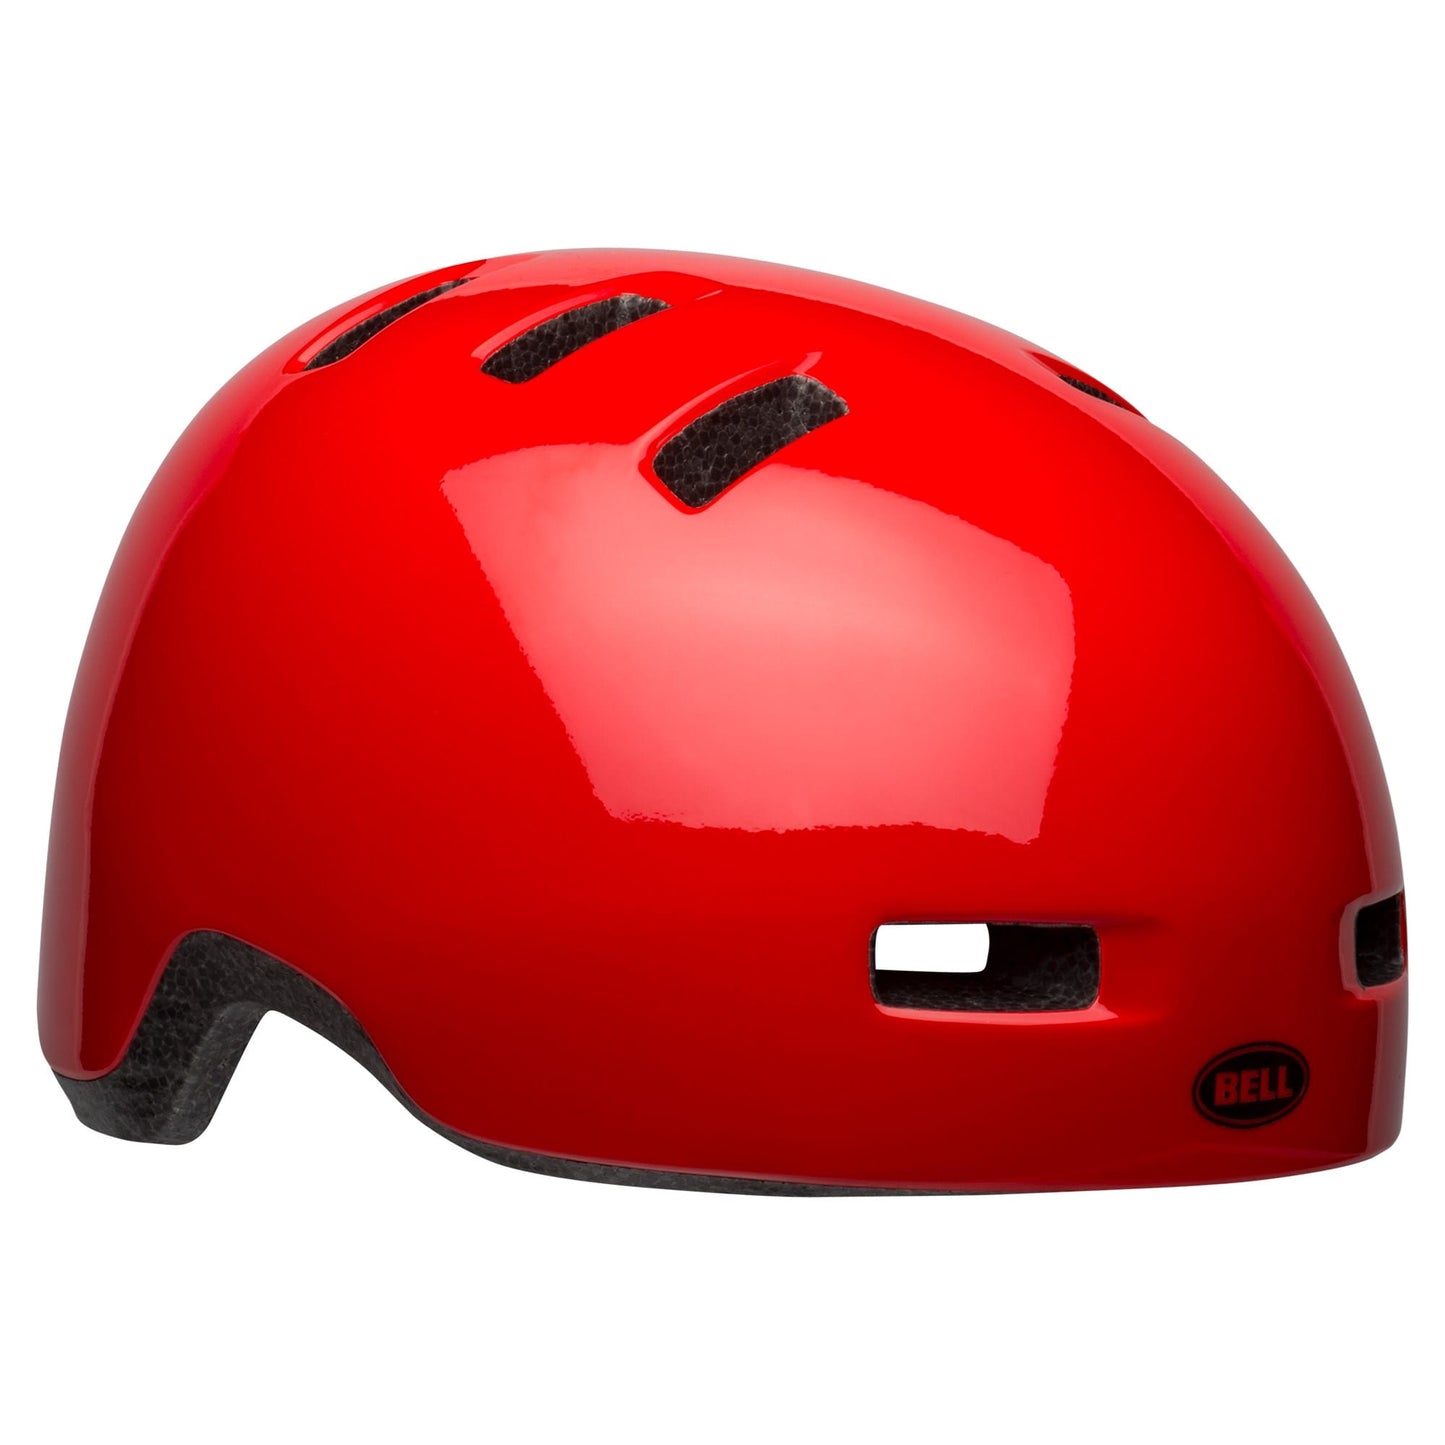 BELL LIL RIPPER CHILD HELMET - SOLID GLOSS RED